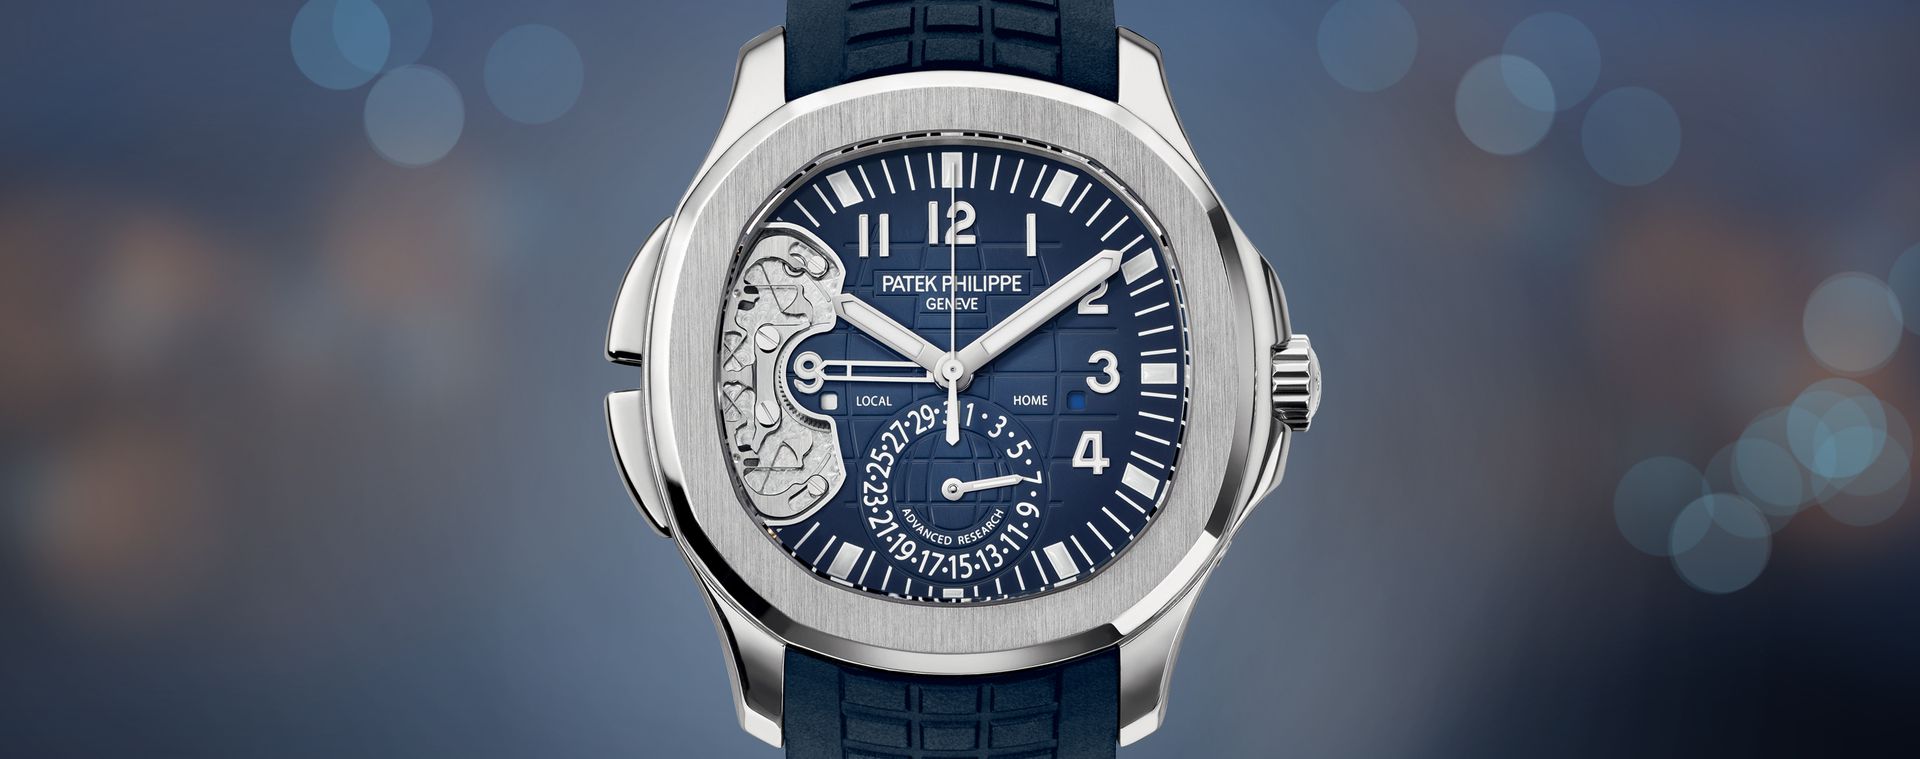 Patek Philippe Advanced Research Aquanaut Travel Time referencia 5650G